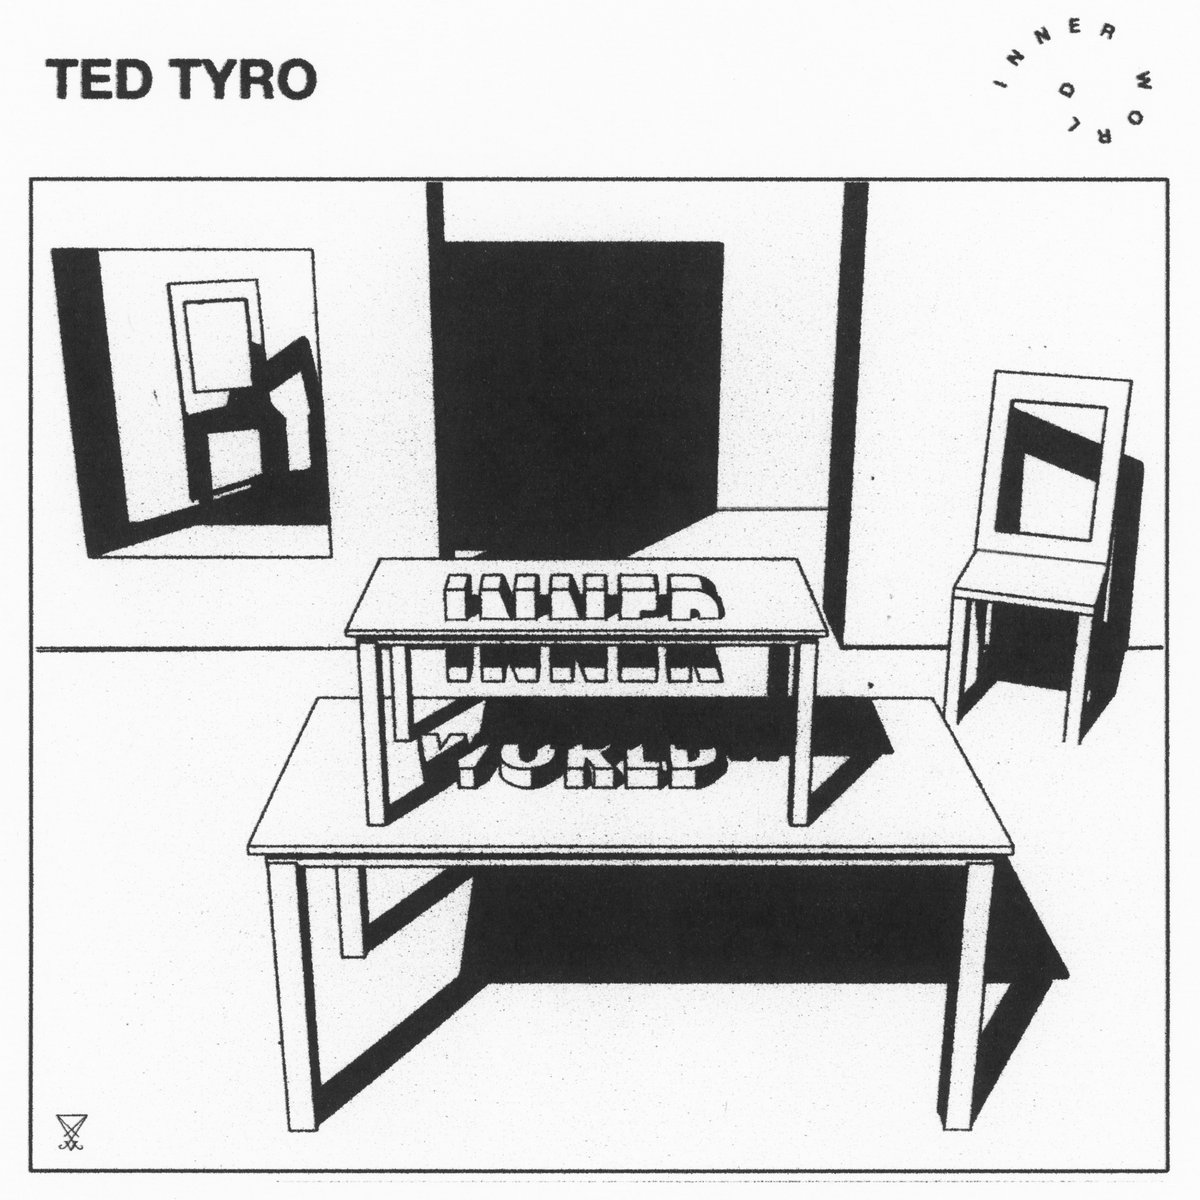 Ted Tyro inner world - black and white geometric drawing of a room